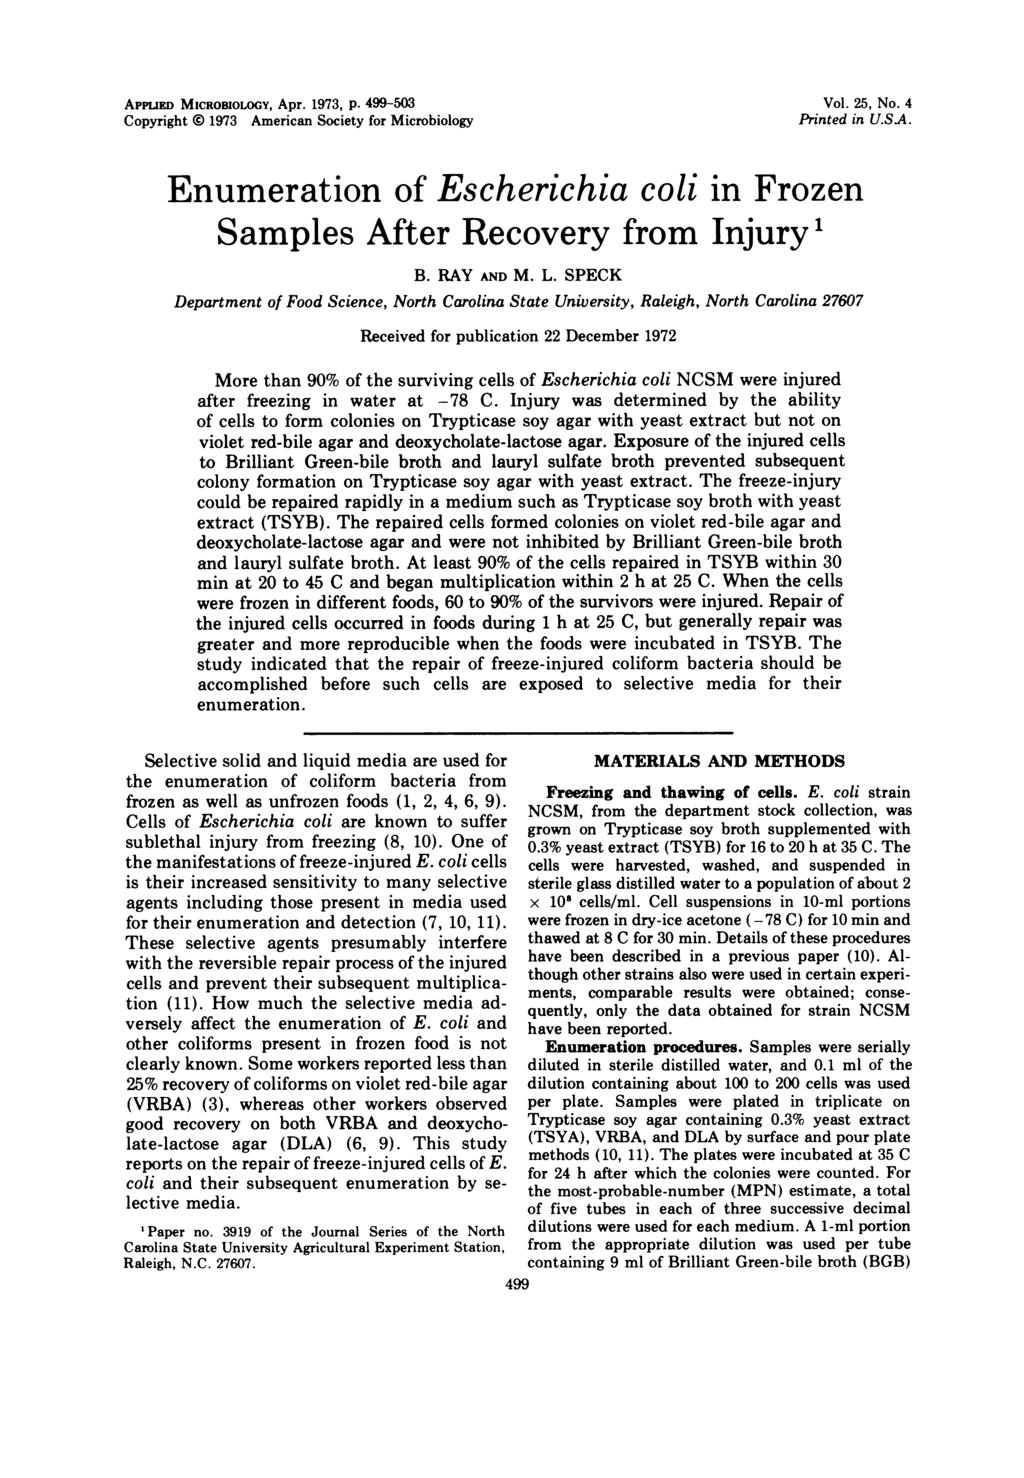 APPUED MICROBIOLOGY, Apr. 1973, p. 499-53 Copyright 1973 American Society for Microbiology Vol. 25, No. 4 Printed in U.SA.